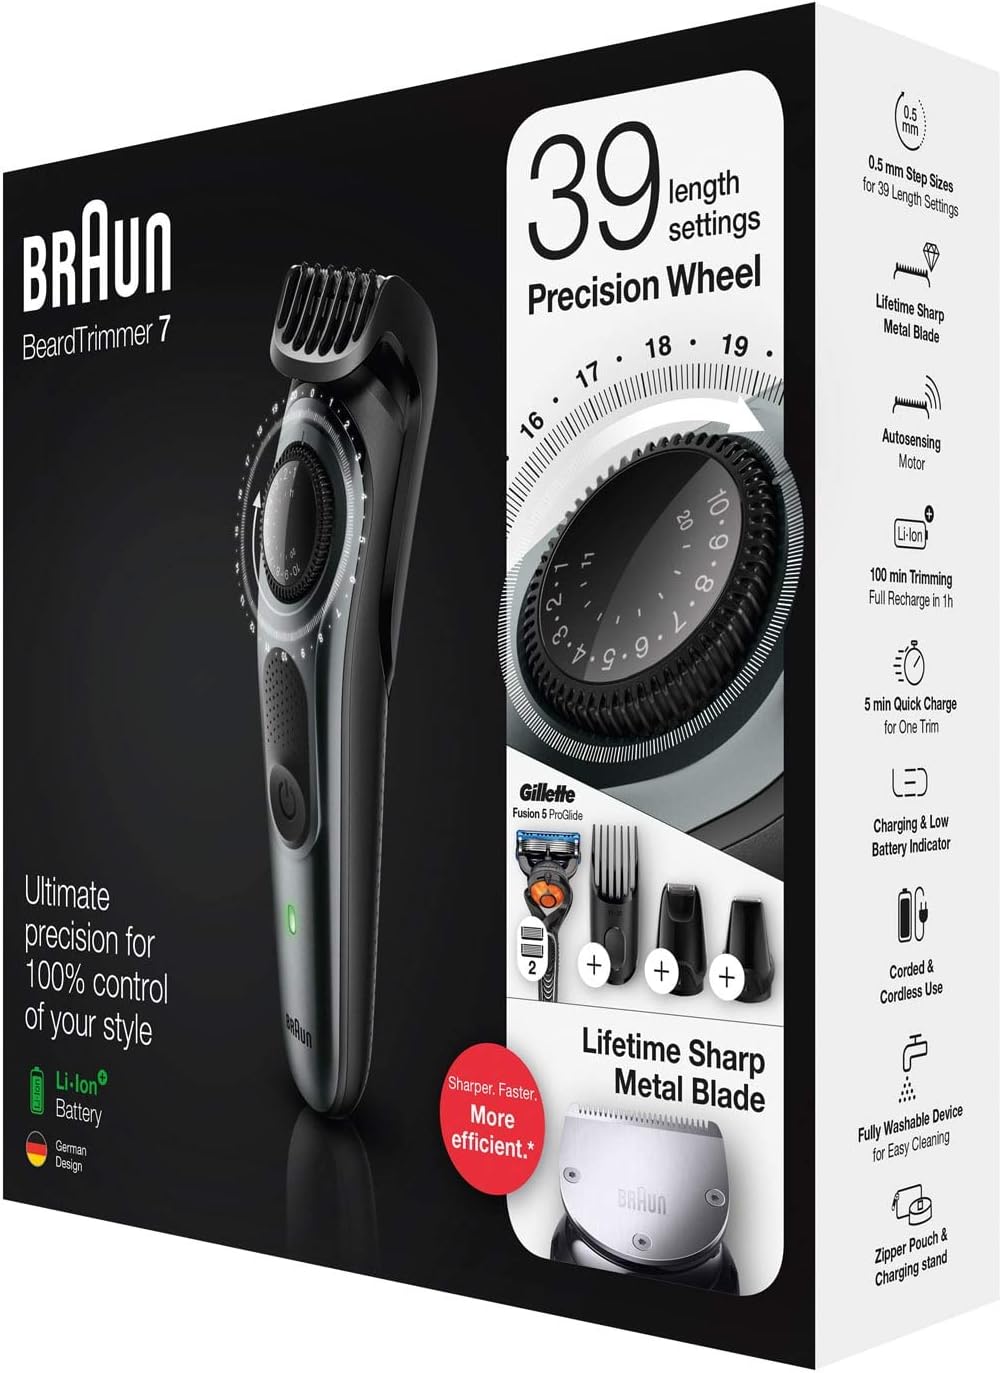 Barun Beard Timmer 7 with 39 Length Settings Precision Wheel Cordless & Rechargeable With Gillette Proglide Razor, Black/Silver Metal, BT7240